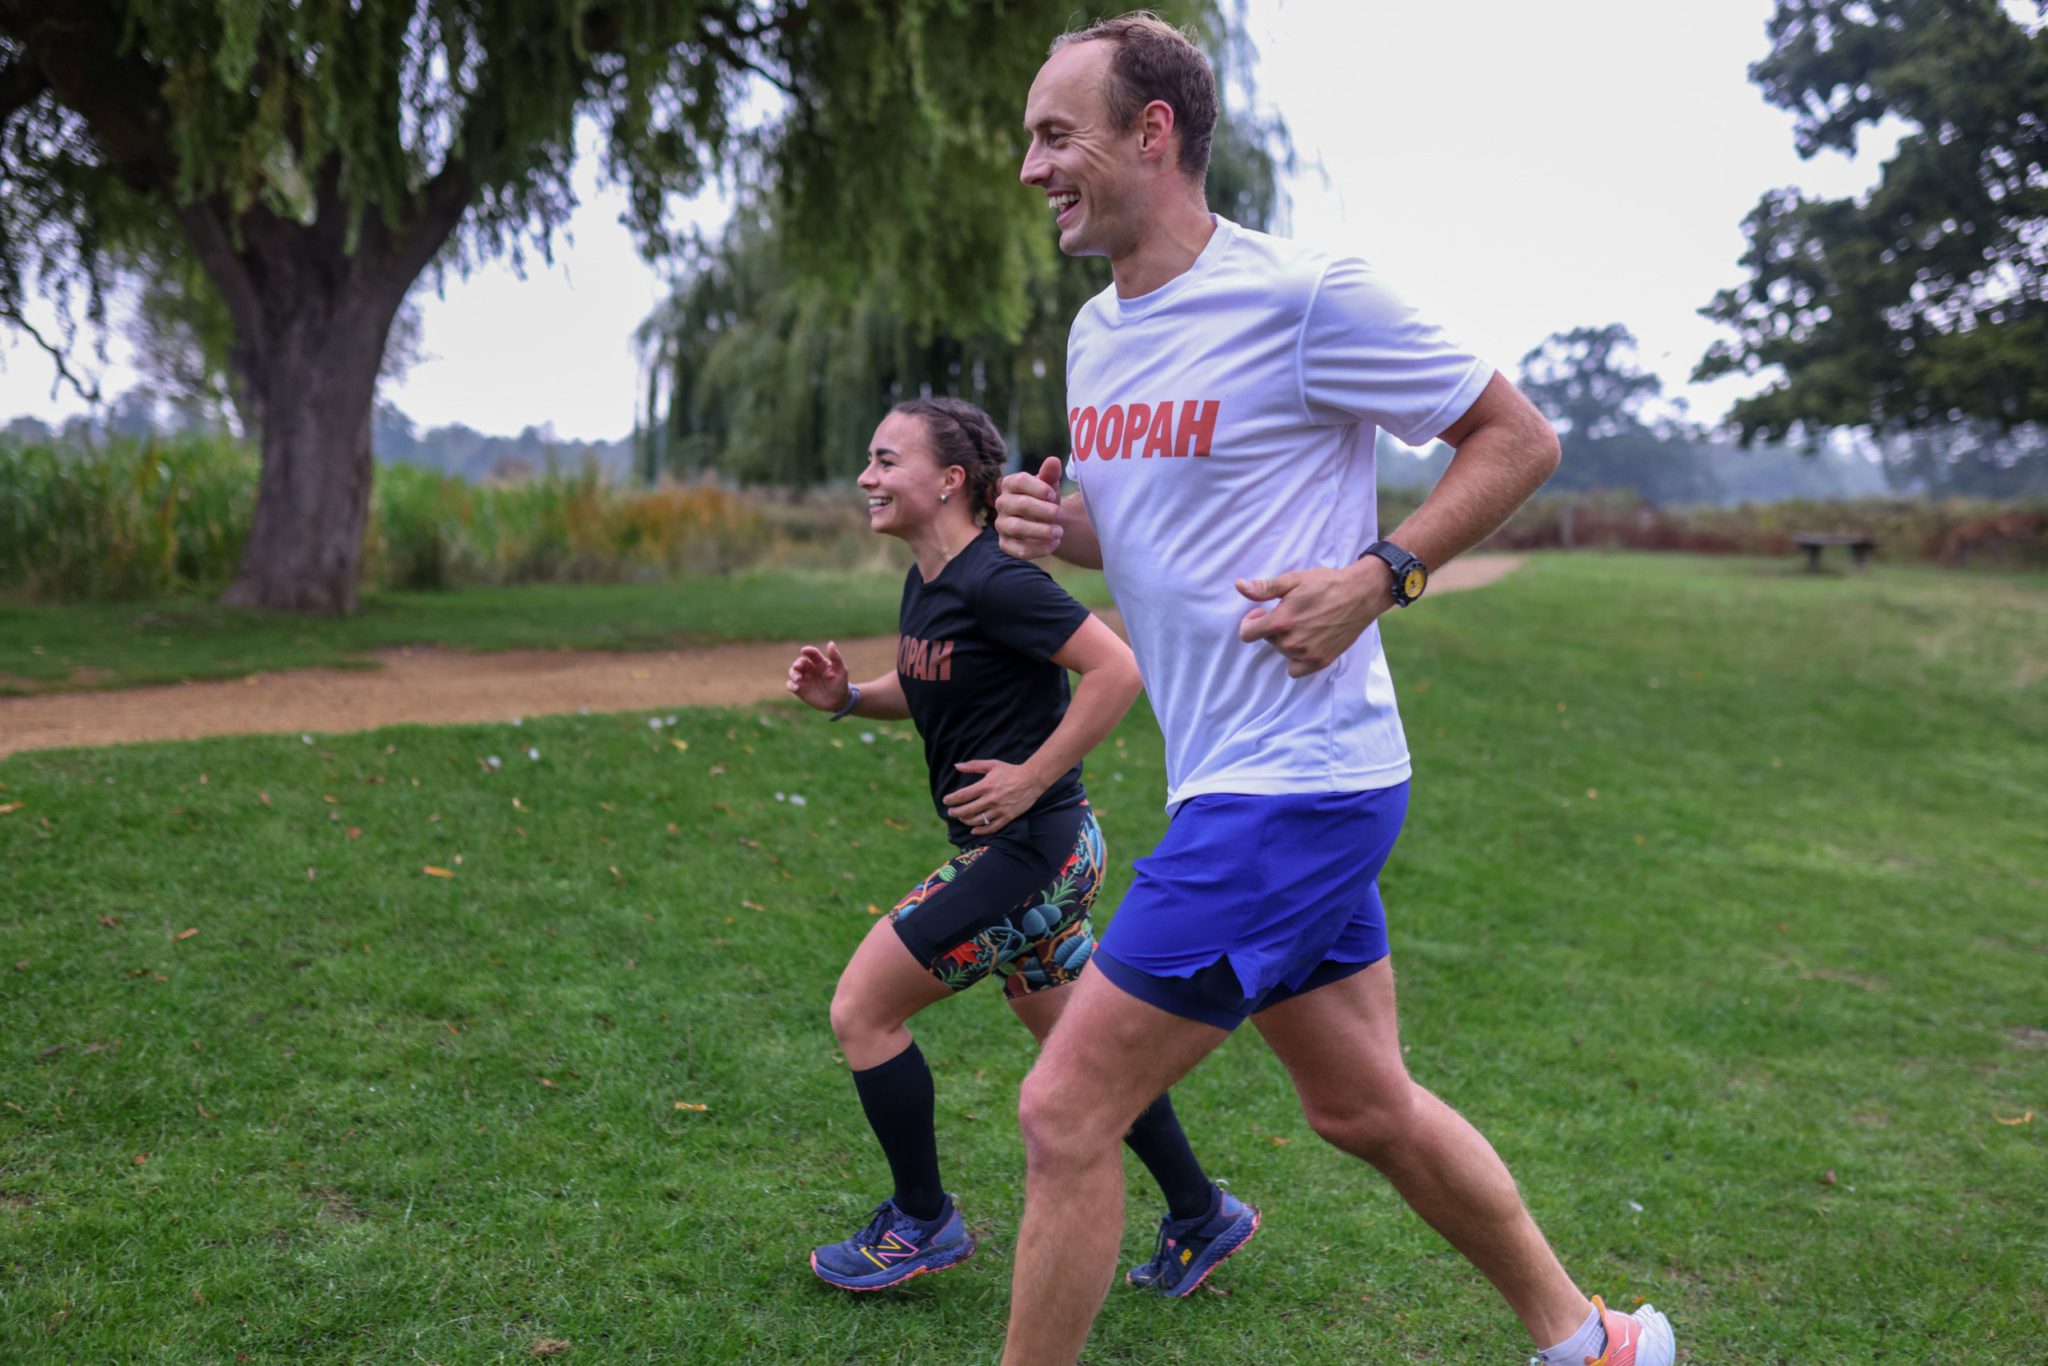 How many parkruns can you run in 24 hours?